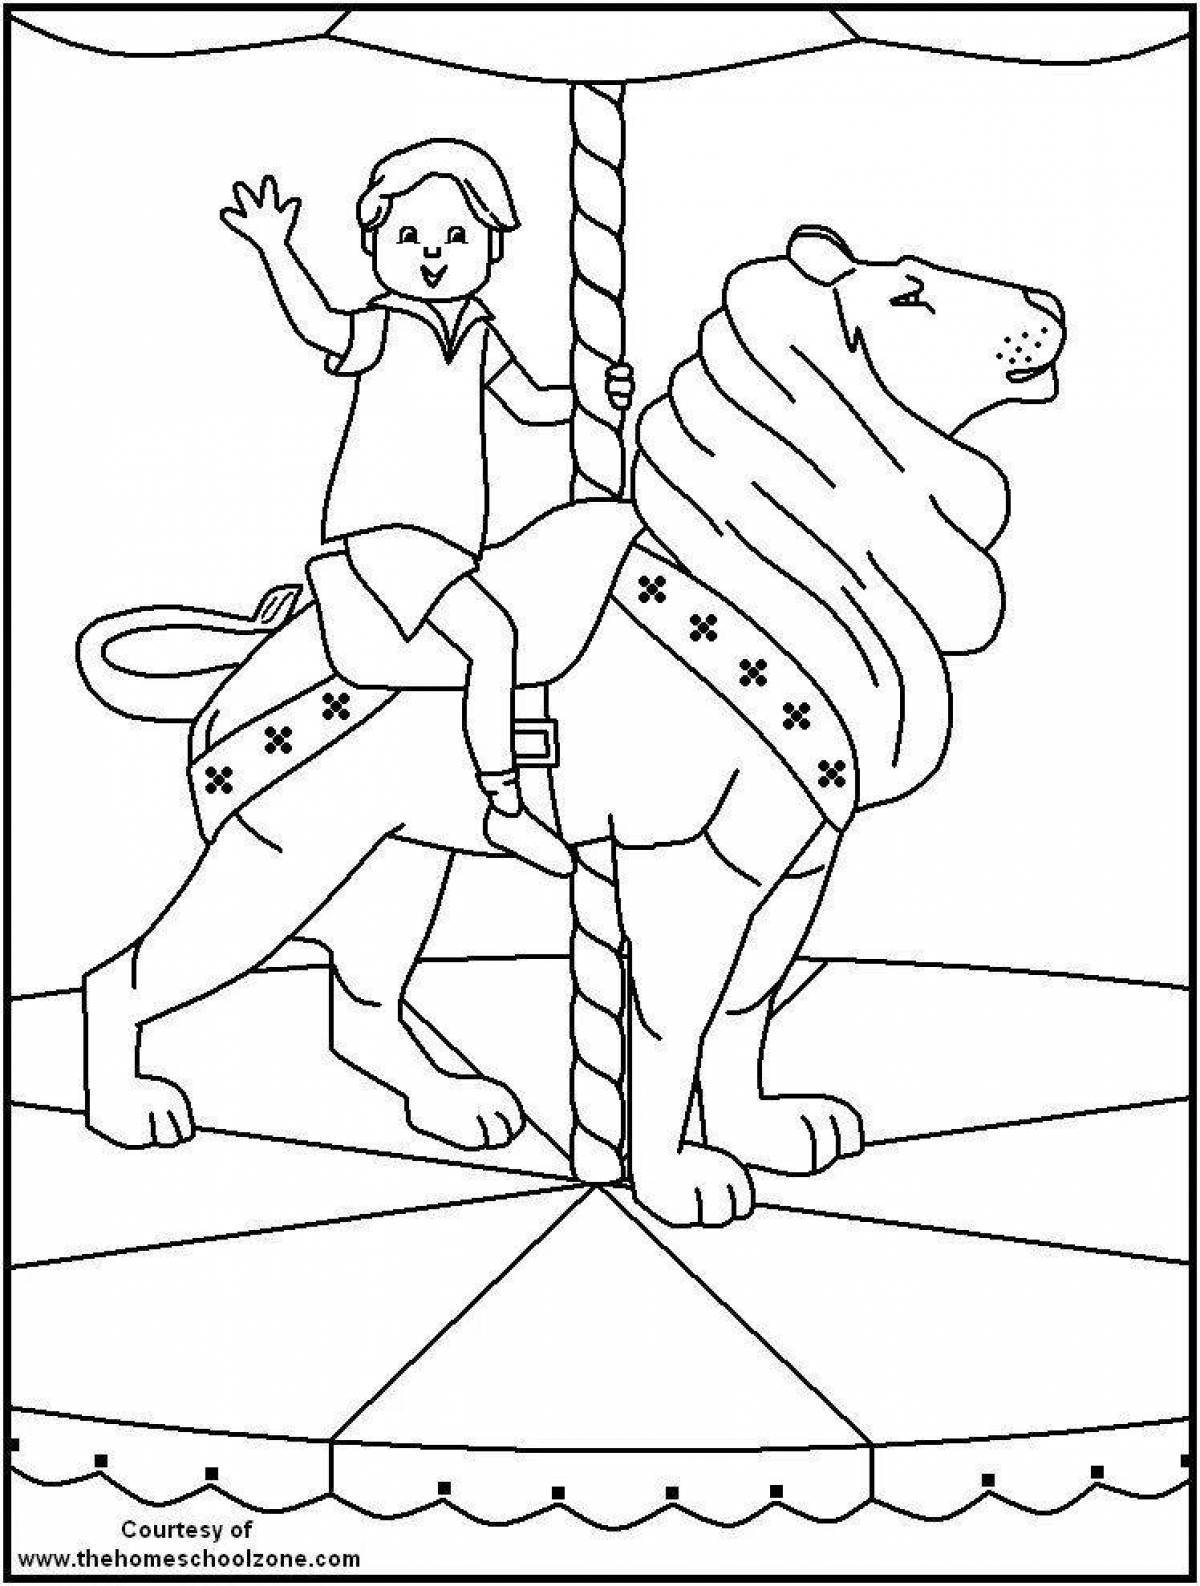 Playful circus coloring book for 6-7 year olds